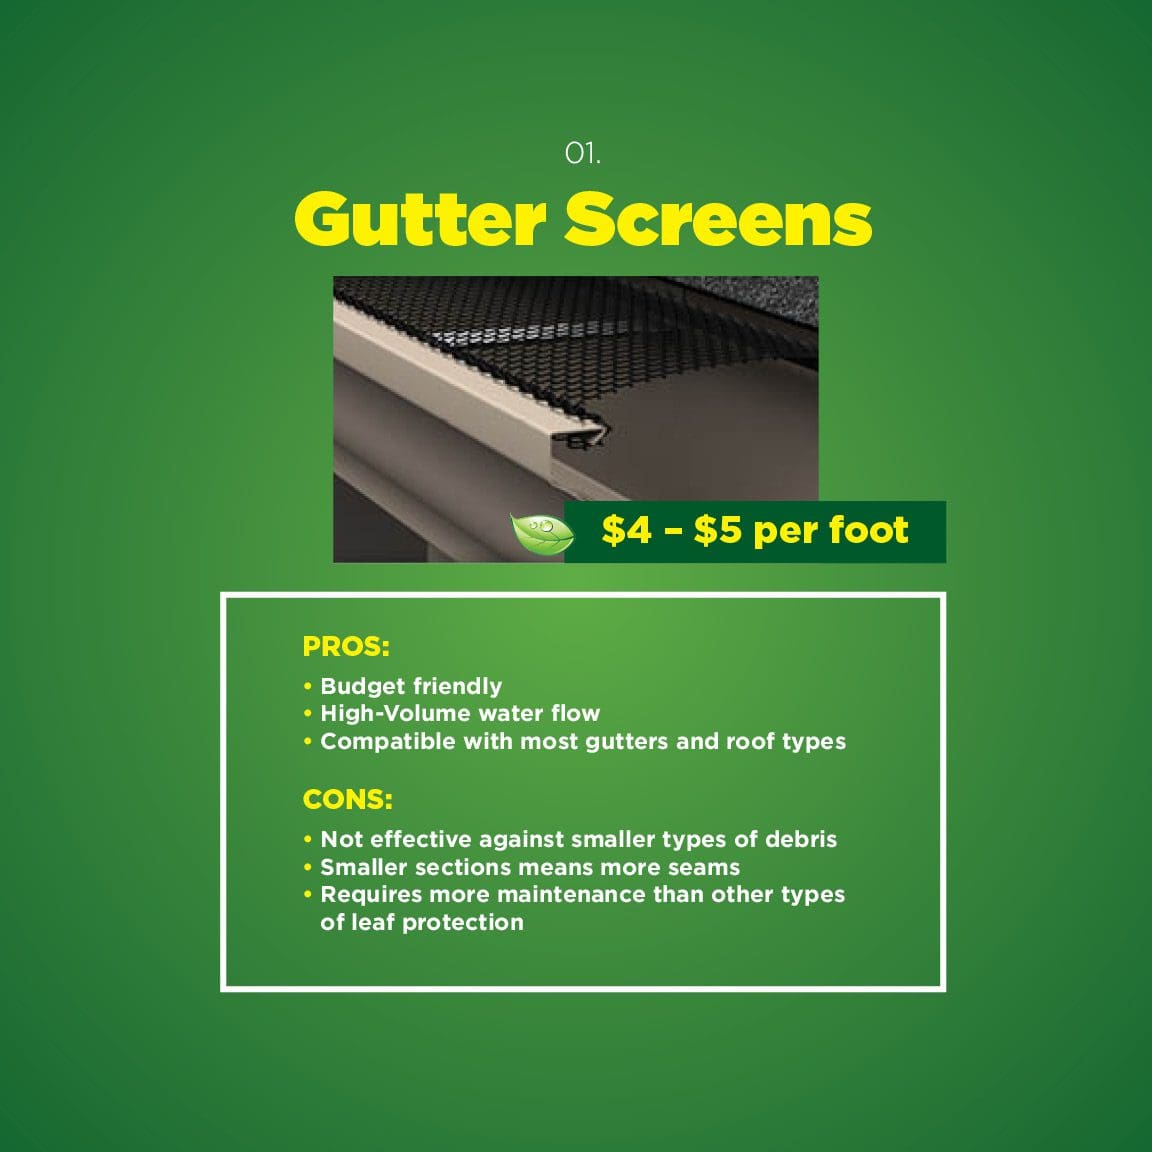 Gutter screens pros and cons